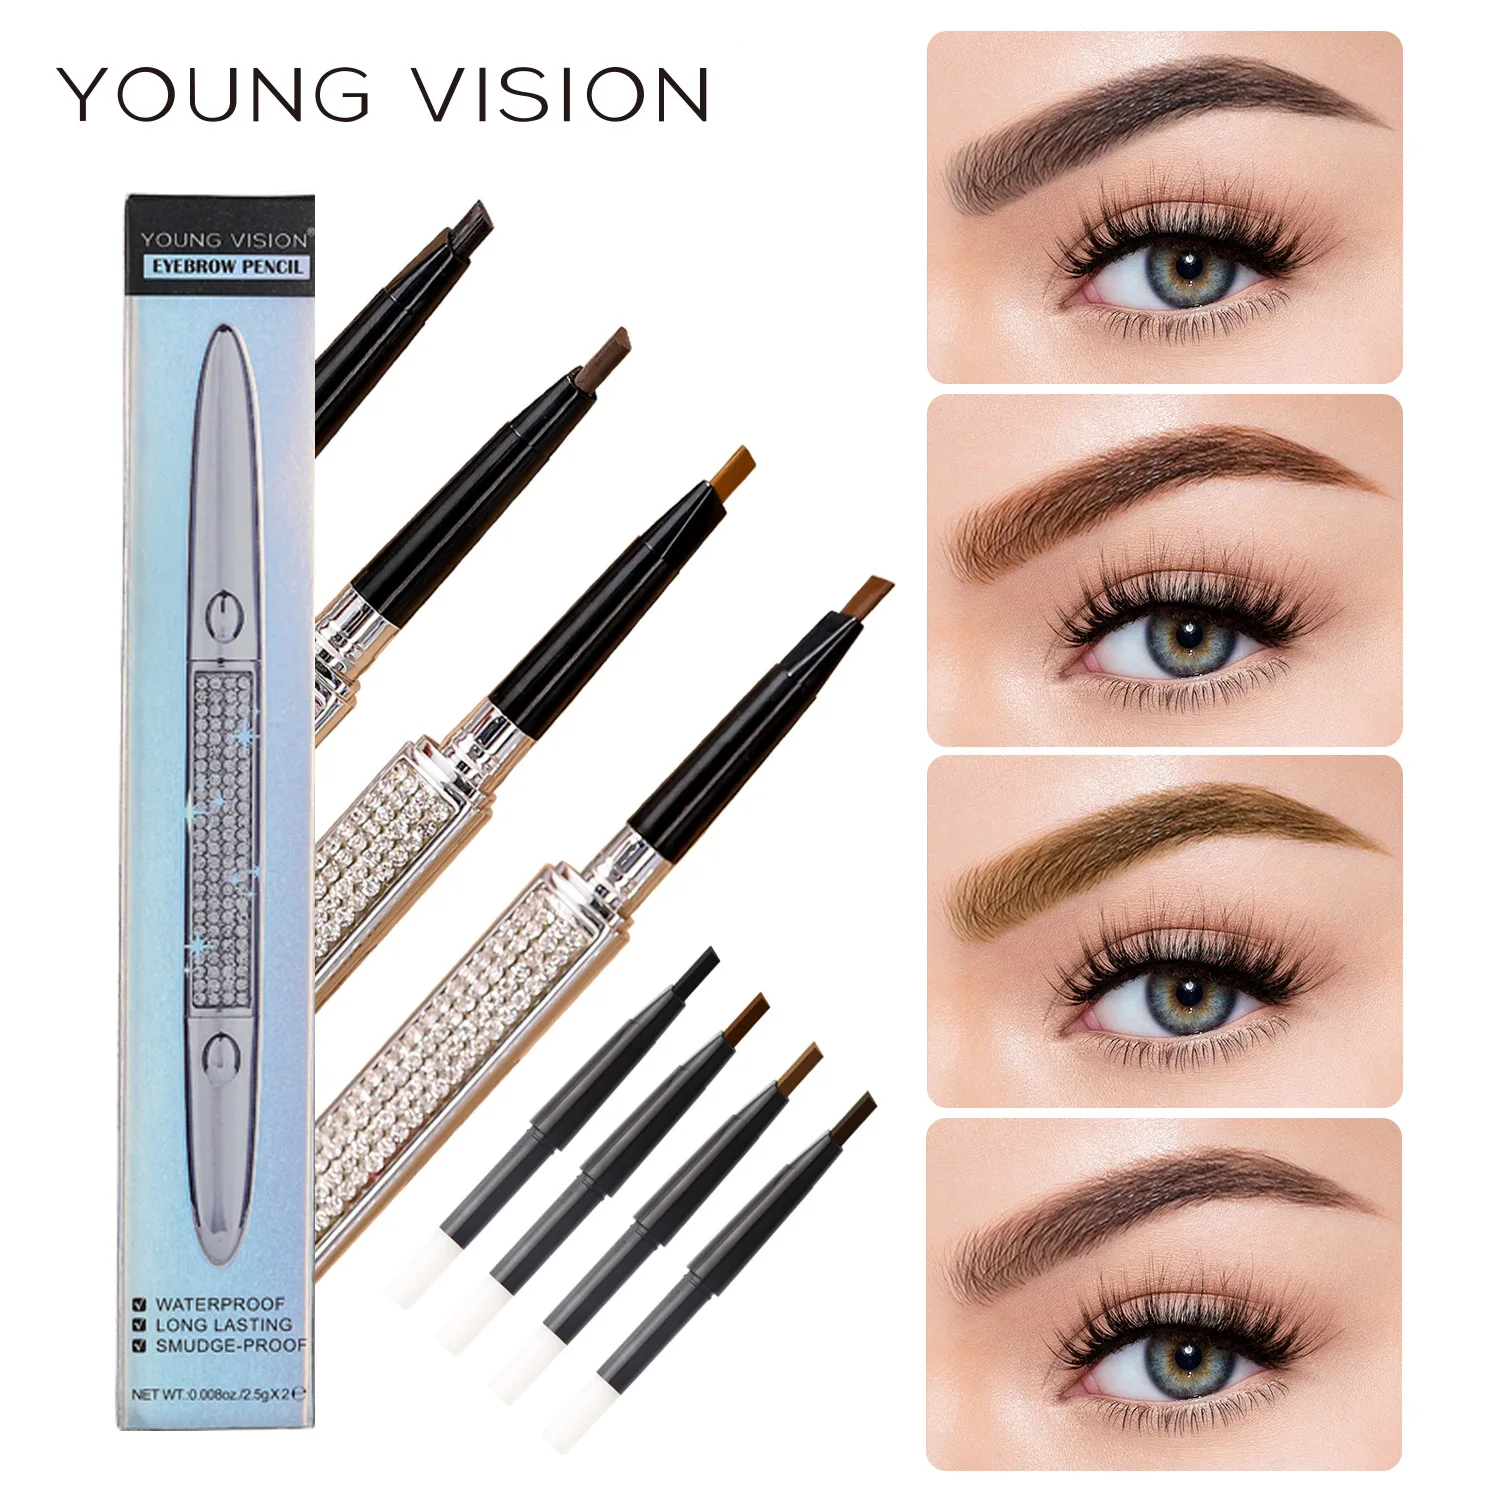 

2-in-1 Eyebrow Pencil With Brush Refill Triangular Tip Easy Draw Natural Without Clumping Waterproof Long-lasting Eyebrow Makeup